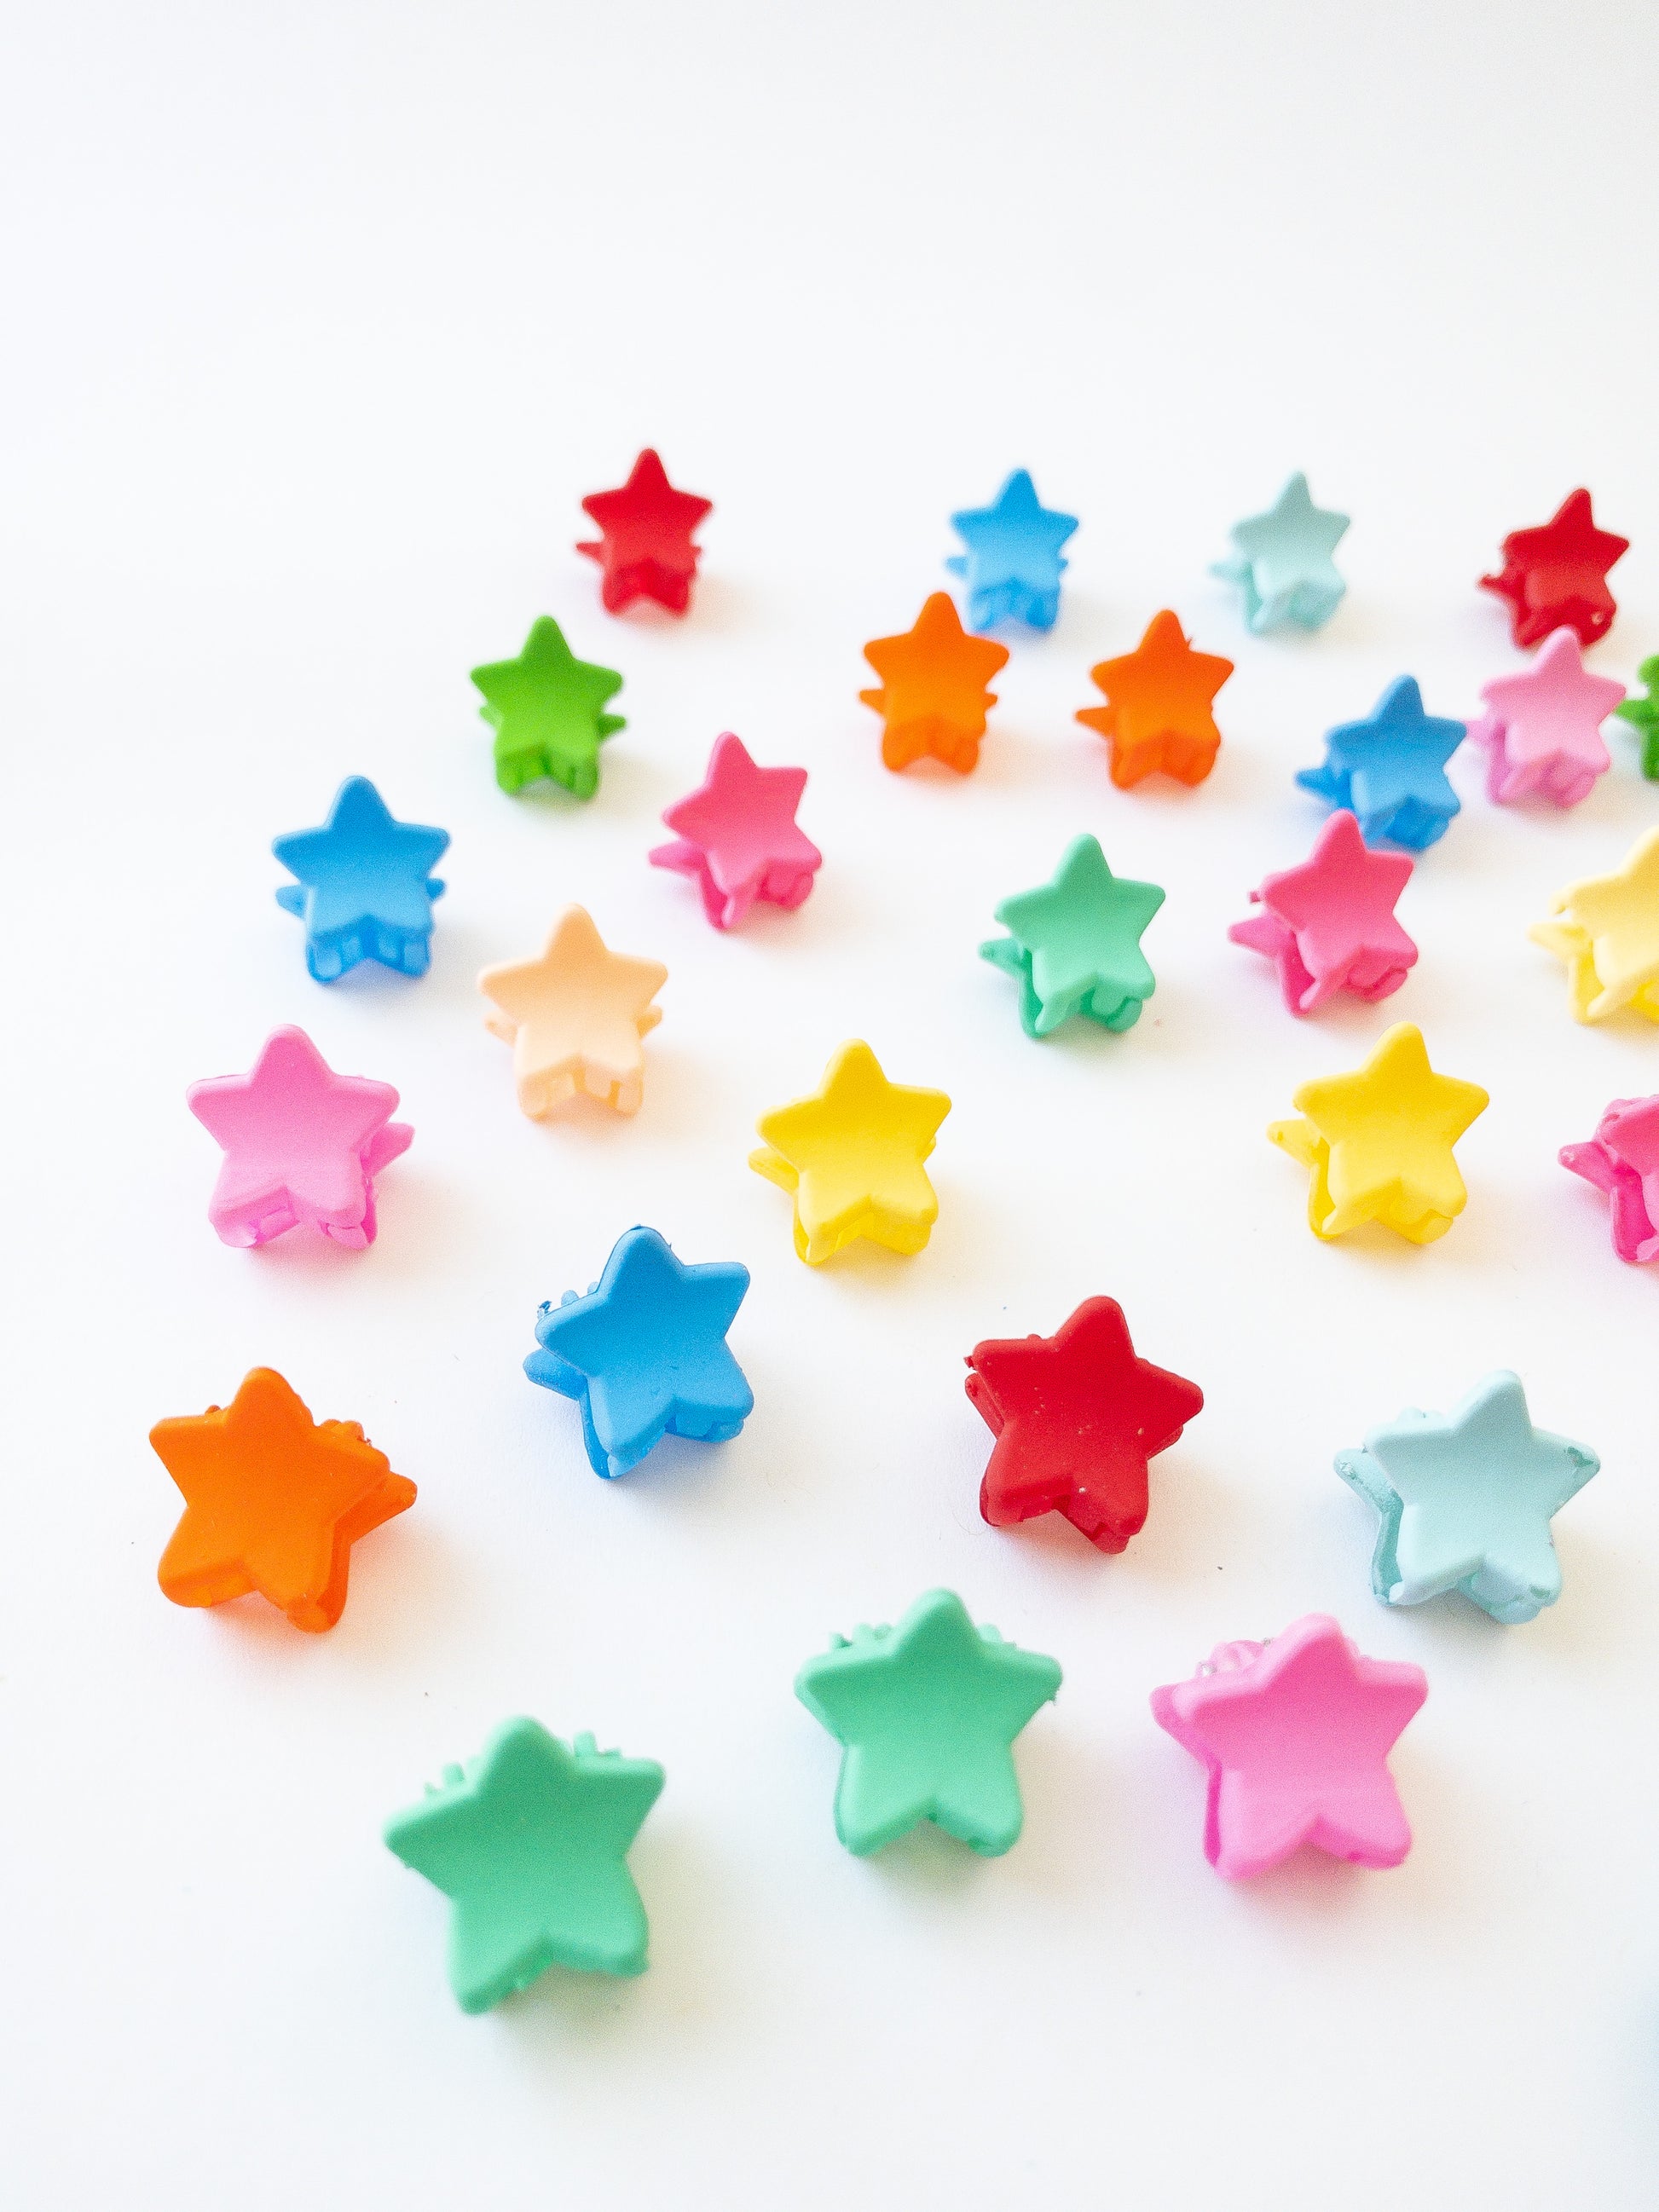 Our signature Korean style mini star hair clips! Each hair clip is only half an inch in length and is great for clipping your hair back in pretty starry rows or using one or two to keep your hair from your face. Each box comes with 36 dainty pieces in a variety of pretty colors in our very own Eggy Cakes box. These really are a must have!